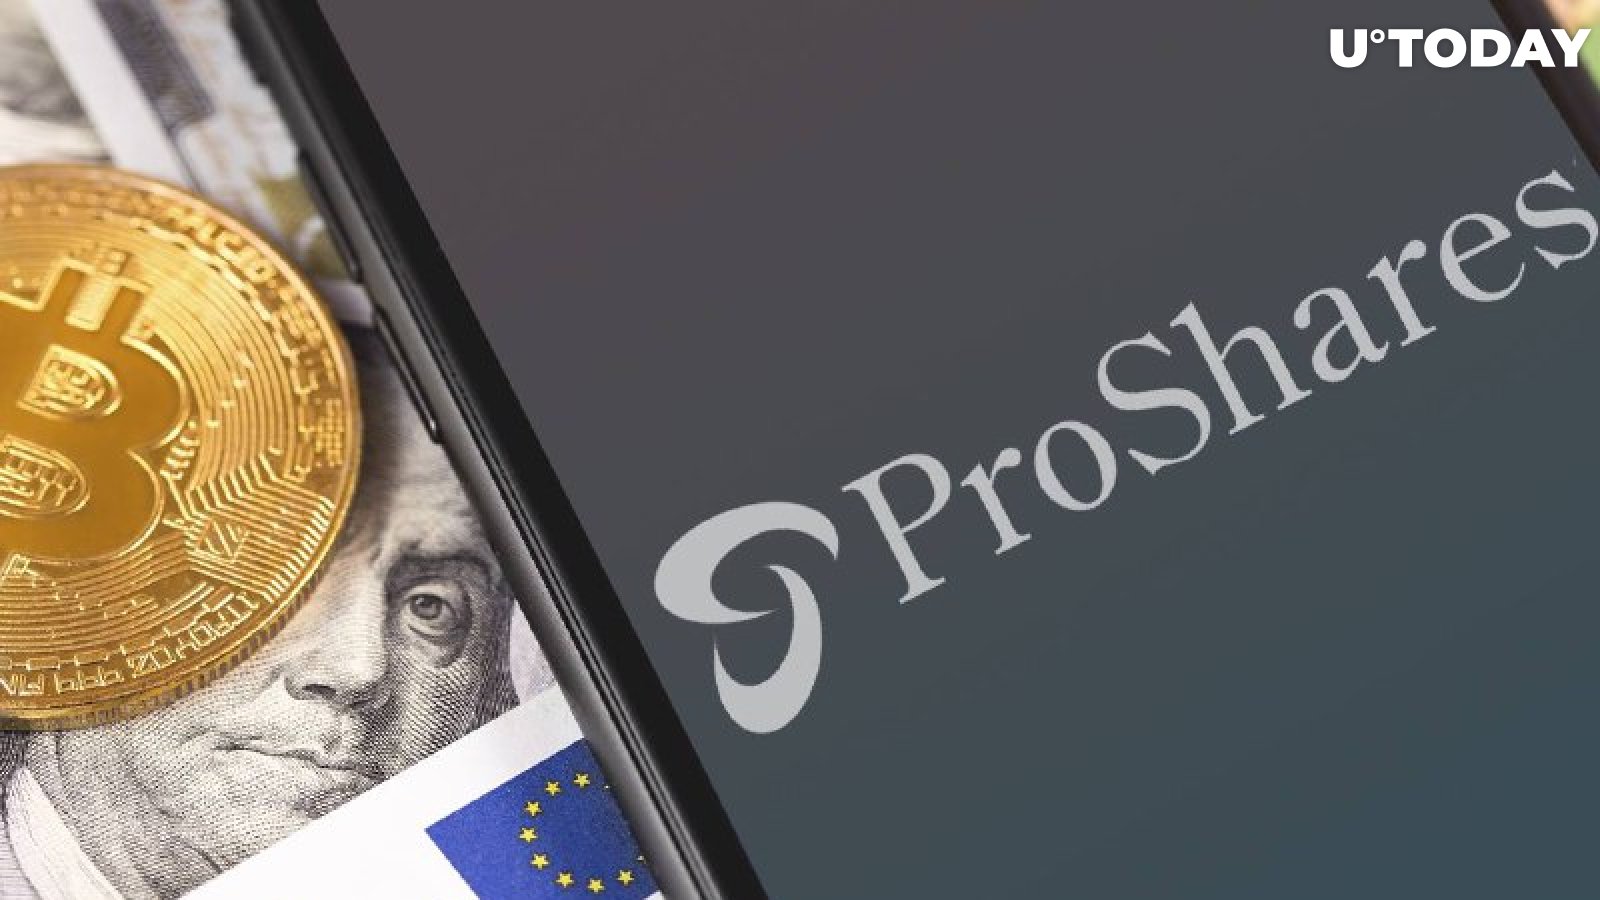 ProShares Short Bitcoin ETF to Launch on Tuesday, June 21